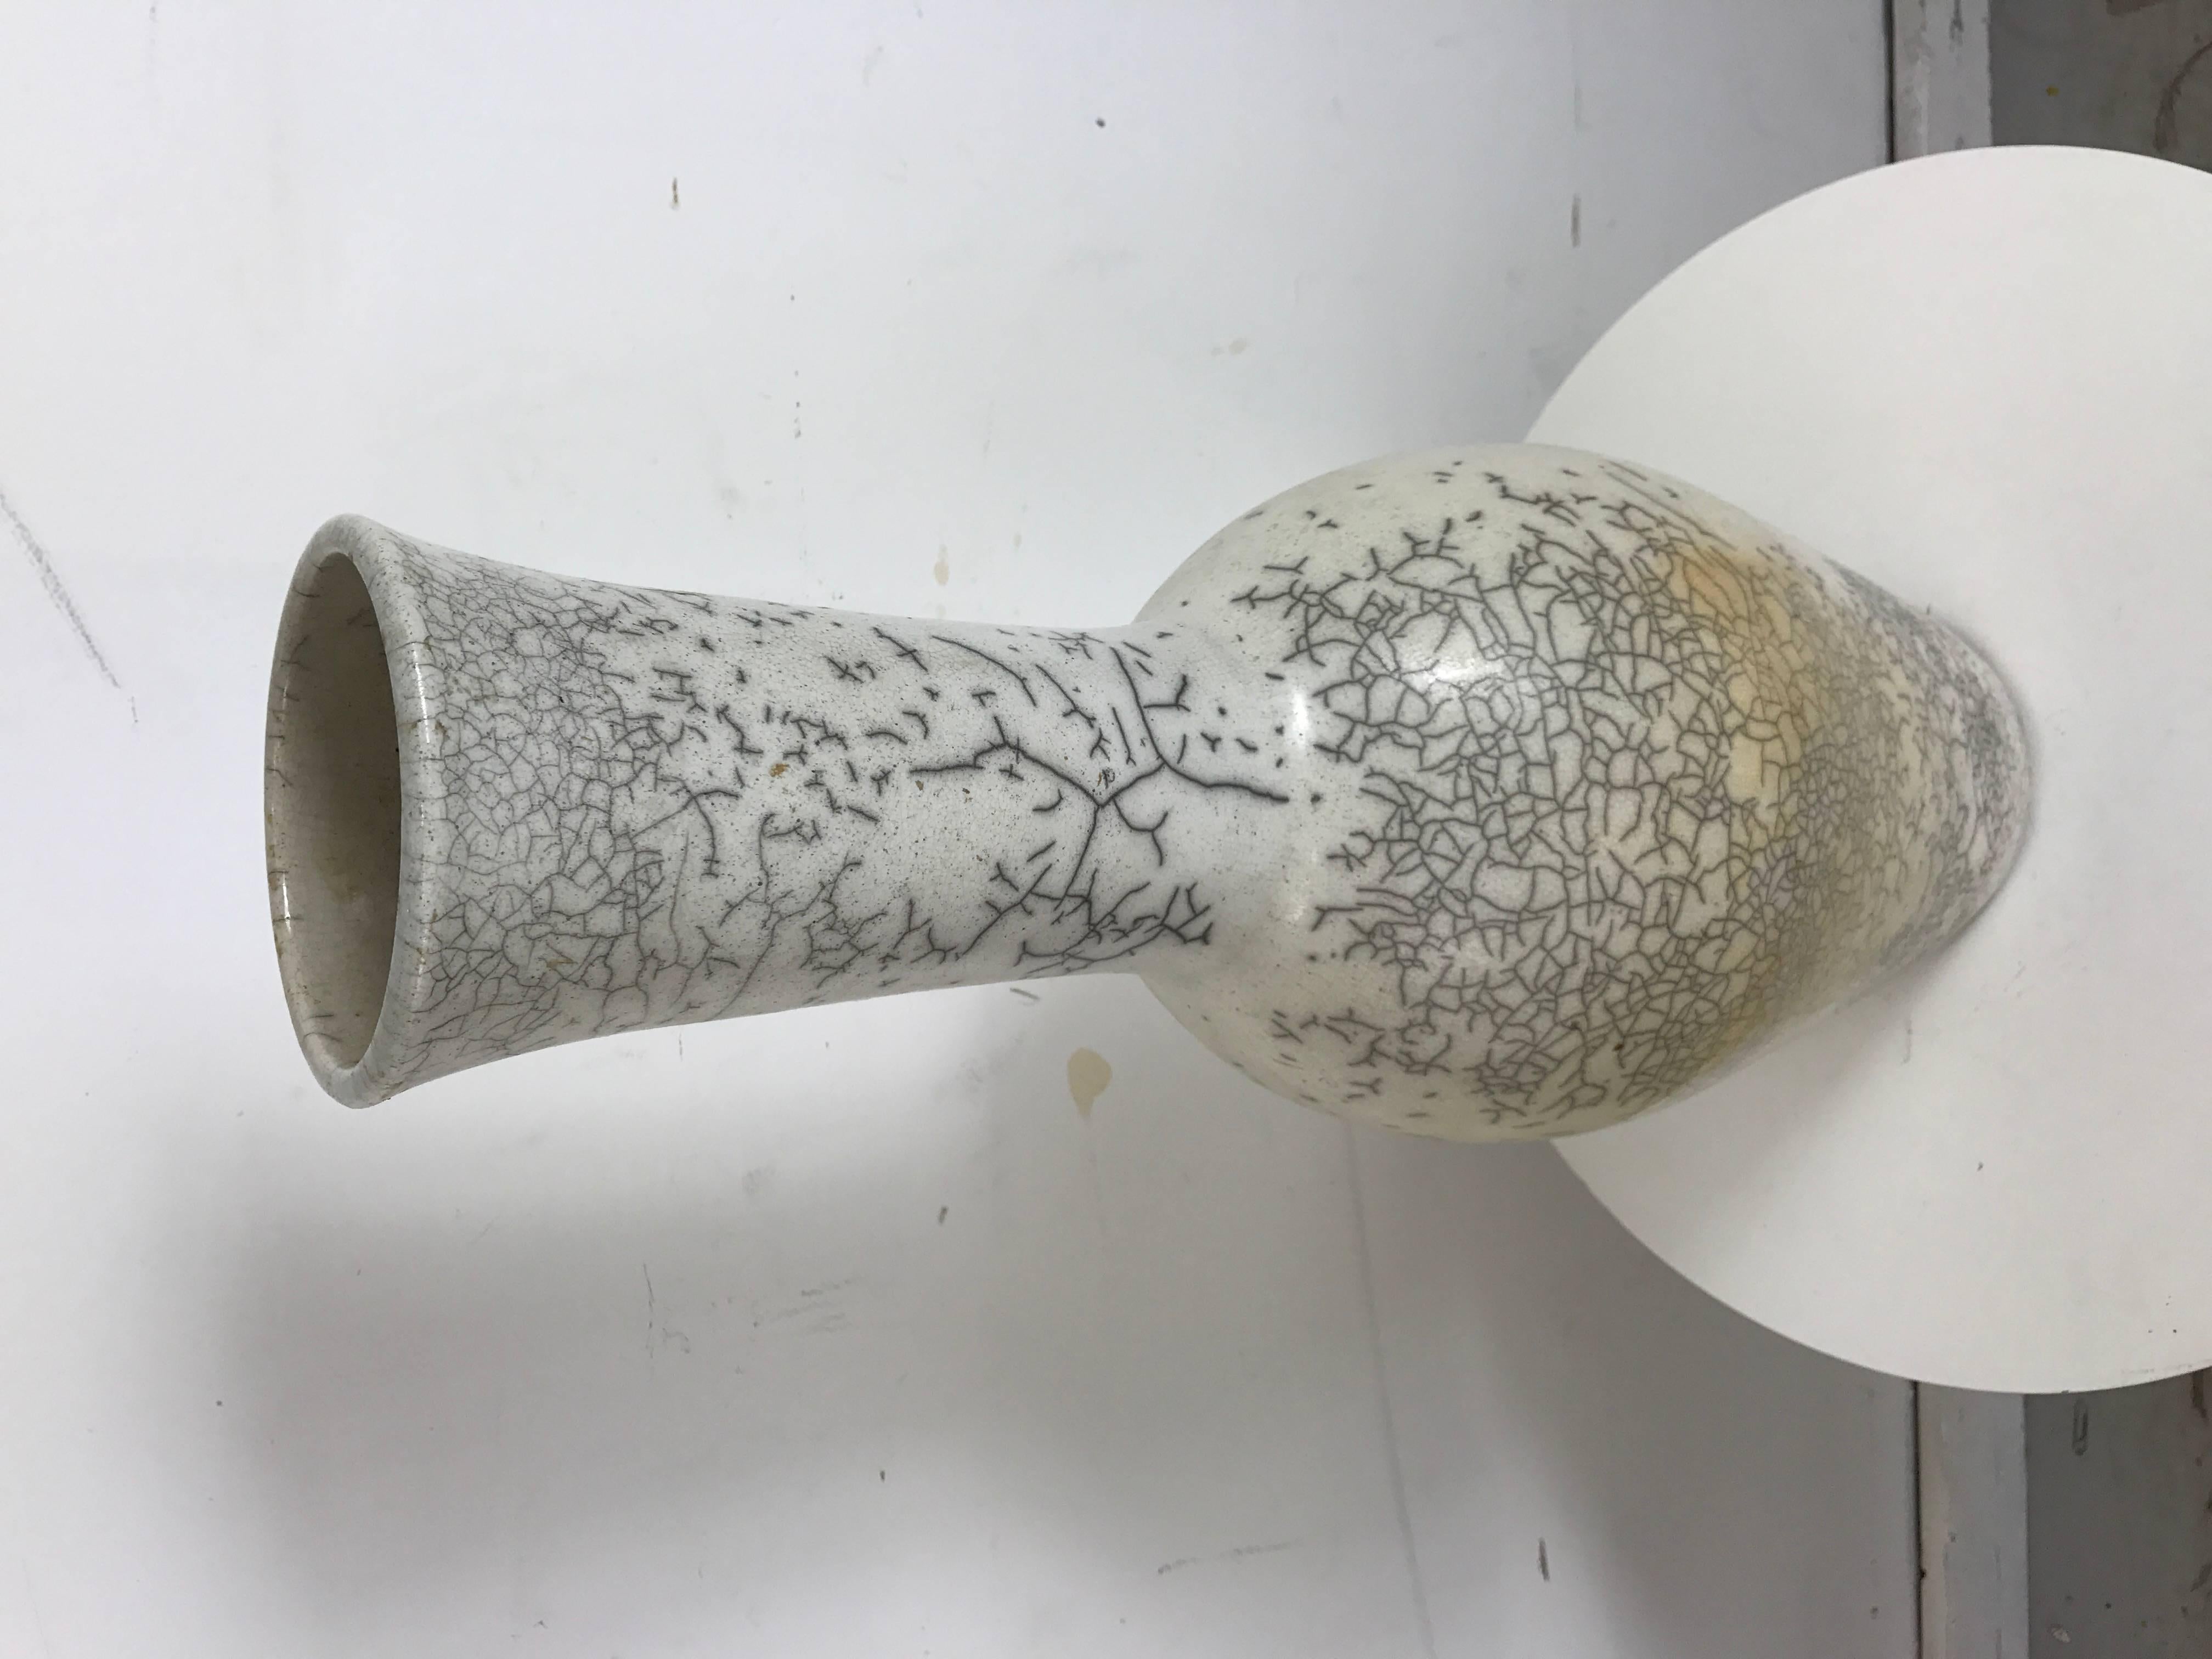 A wonderful example of Nancee Meeker's raku work is found in this large vessel. The primarily white glazed surface, with subtle nuances of cream and grey is complimented by the grey crackling that appears in an unstructured manner around the